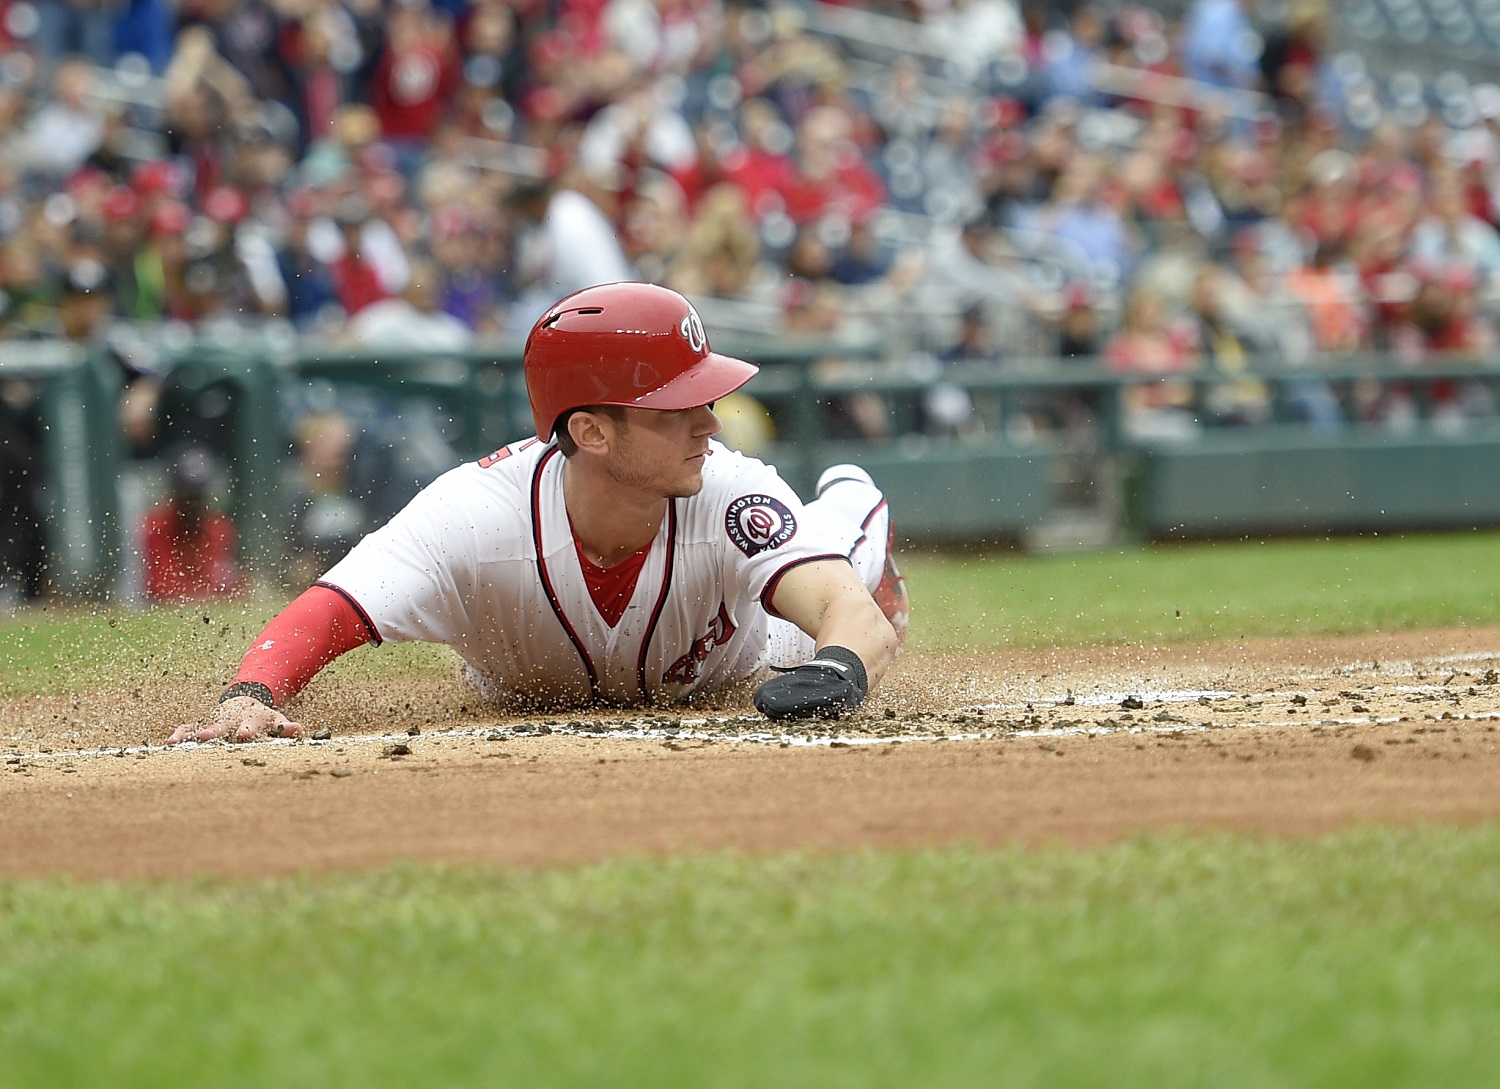 Washington Nationals' Trea Turner slides home to score a run on a single by Bryce Harper during the first inning of a baseball game against the Miami Marlins, Saturday, Oct. 1, 2016, in Washington. (AP Photo/Nick Wass)